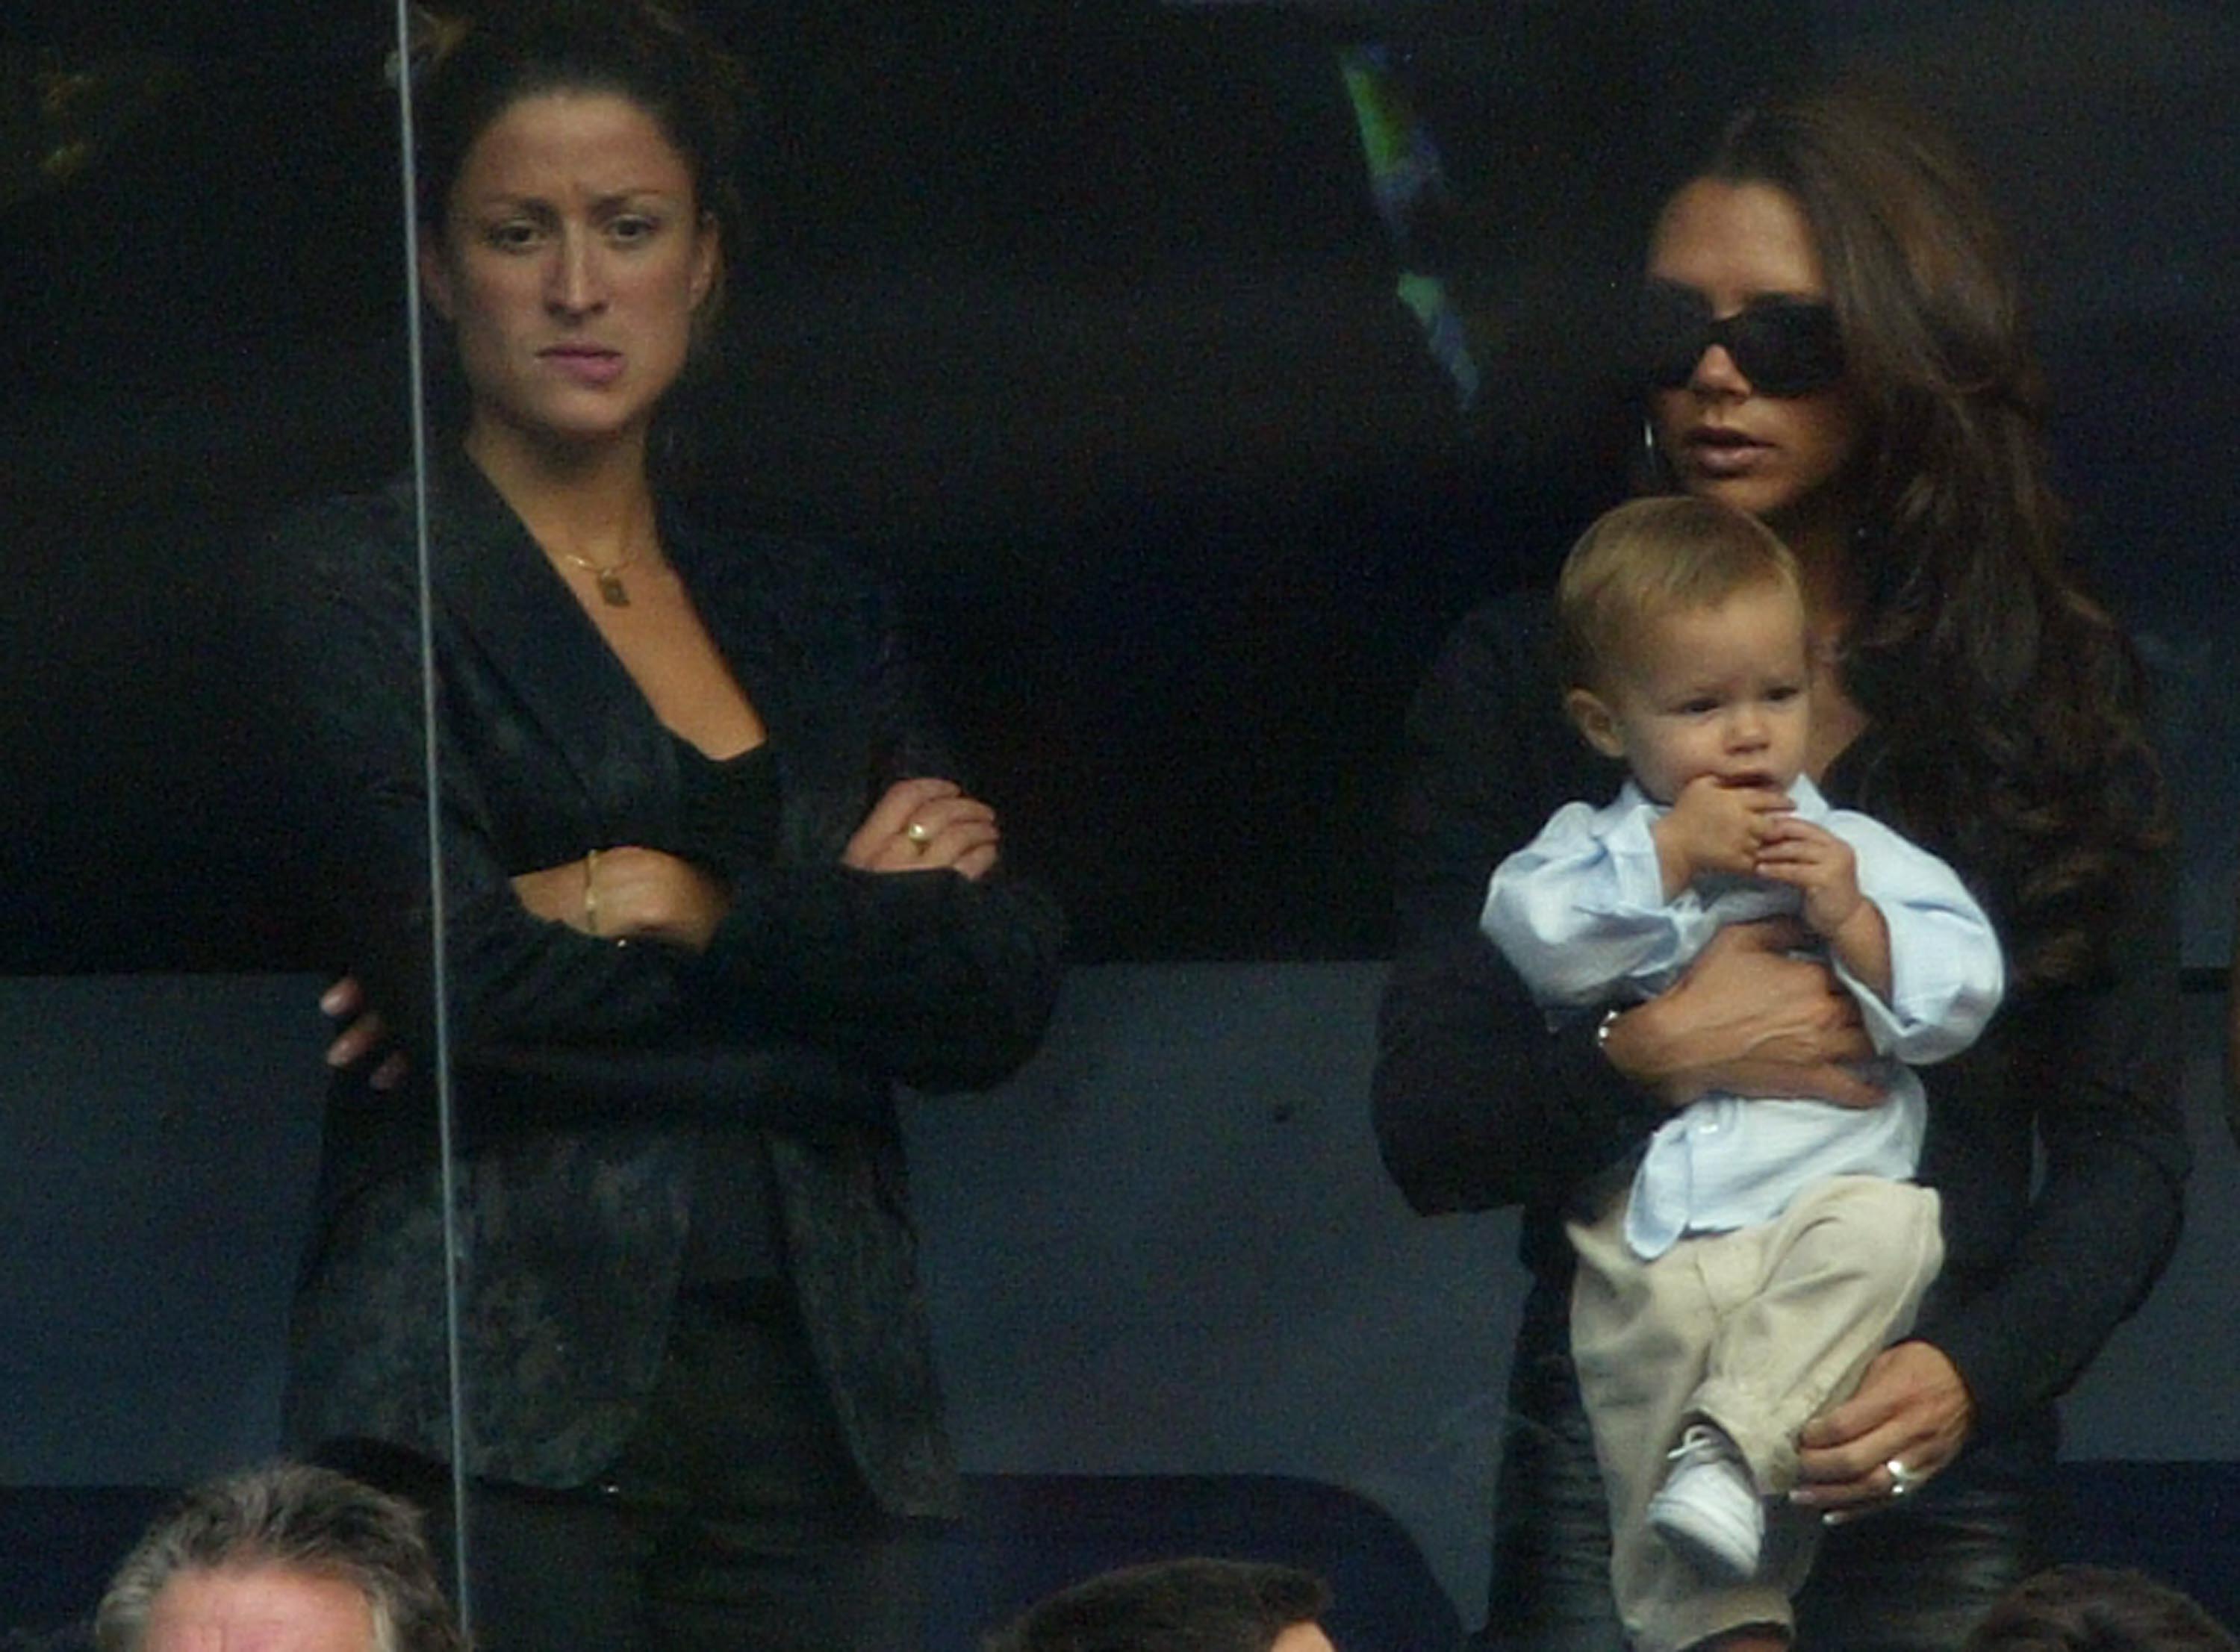 Rebecca Loos stands beside Victoria Beckham carrying her son Romeo during the Spanish Primera Liga match between Real Madrid and Valladolid at the Santiago Bernabeu Stadium on September 13, 2003 in Madrid, Spain. | Source: Getty Images